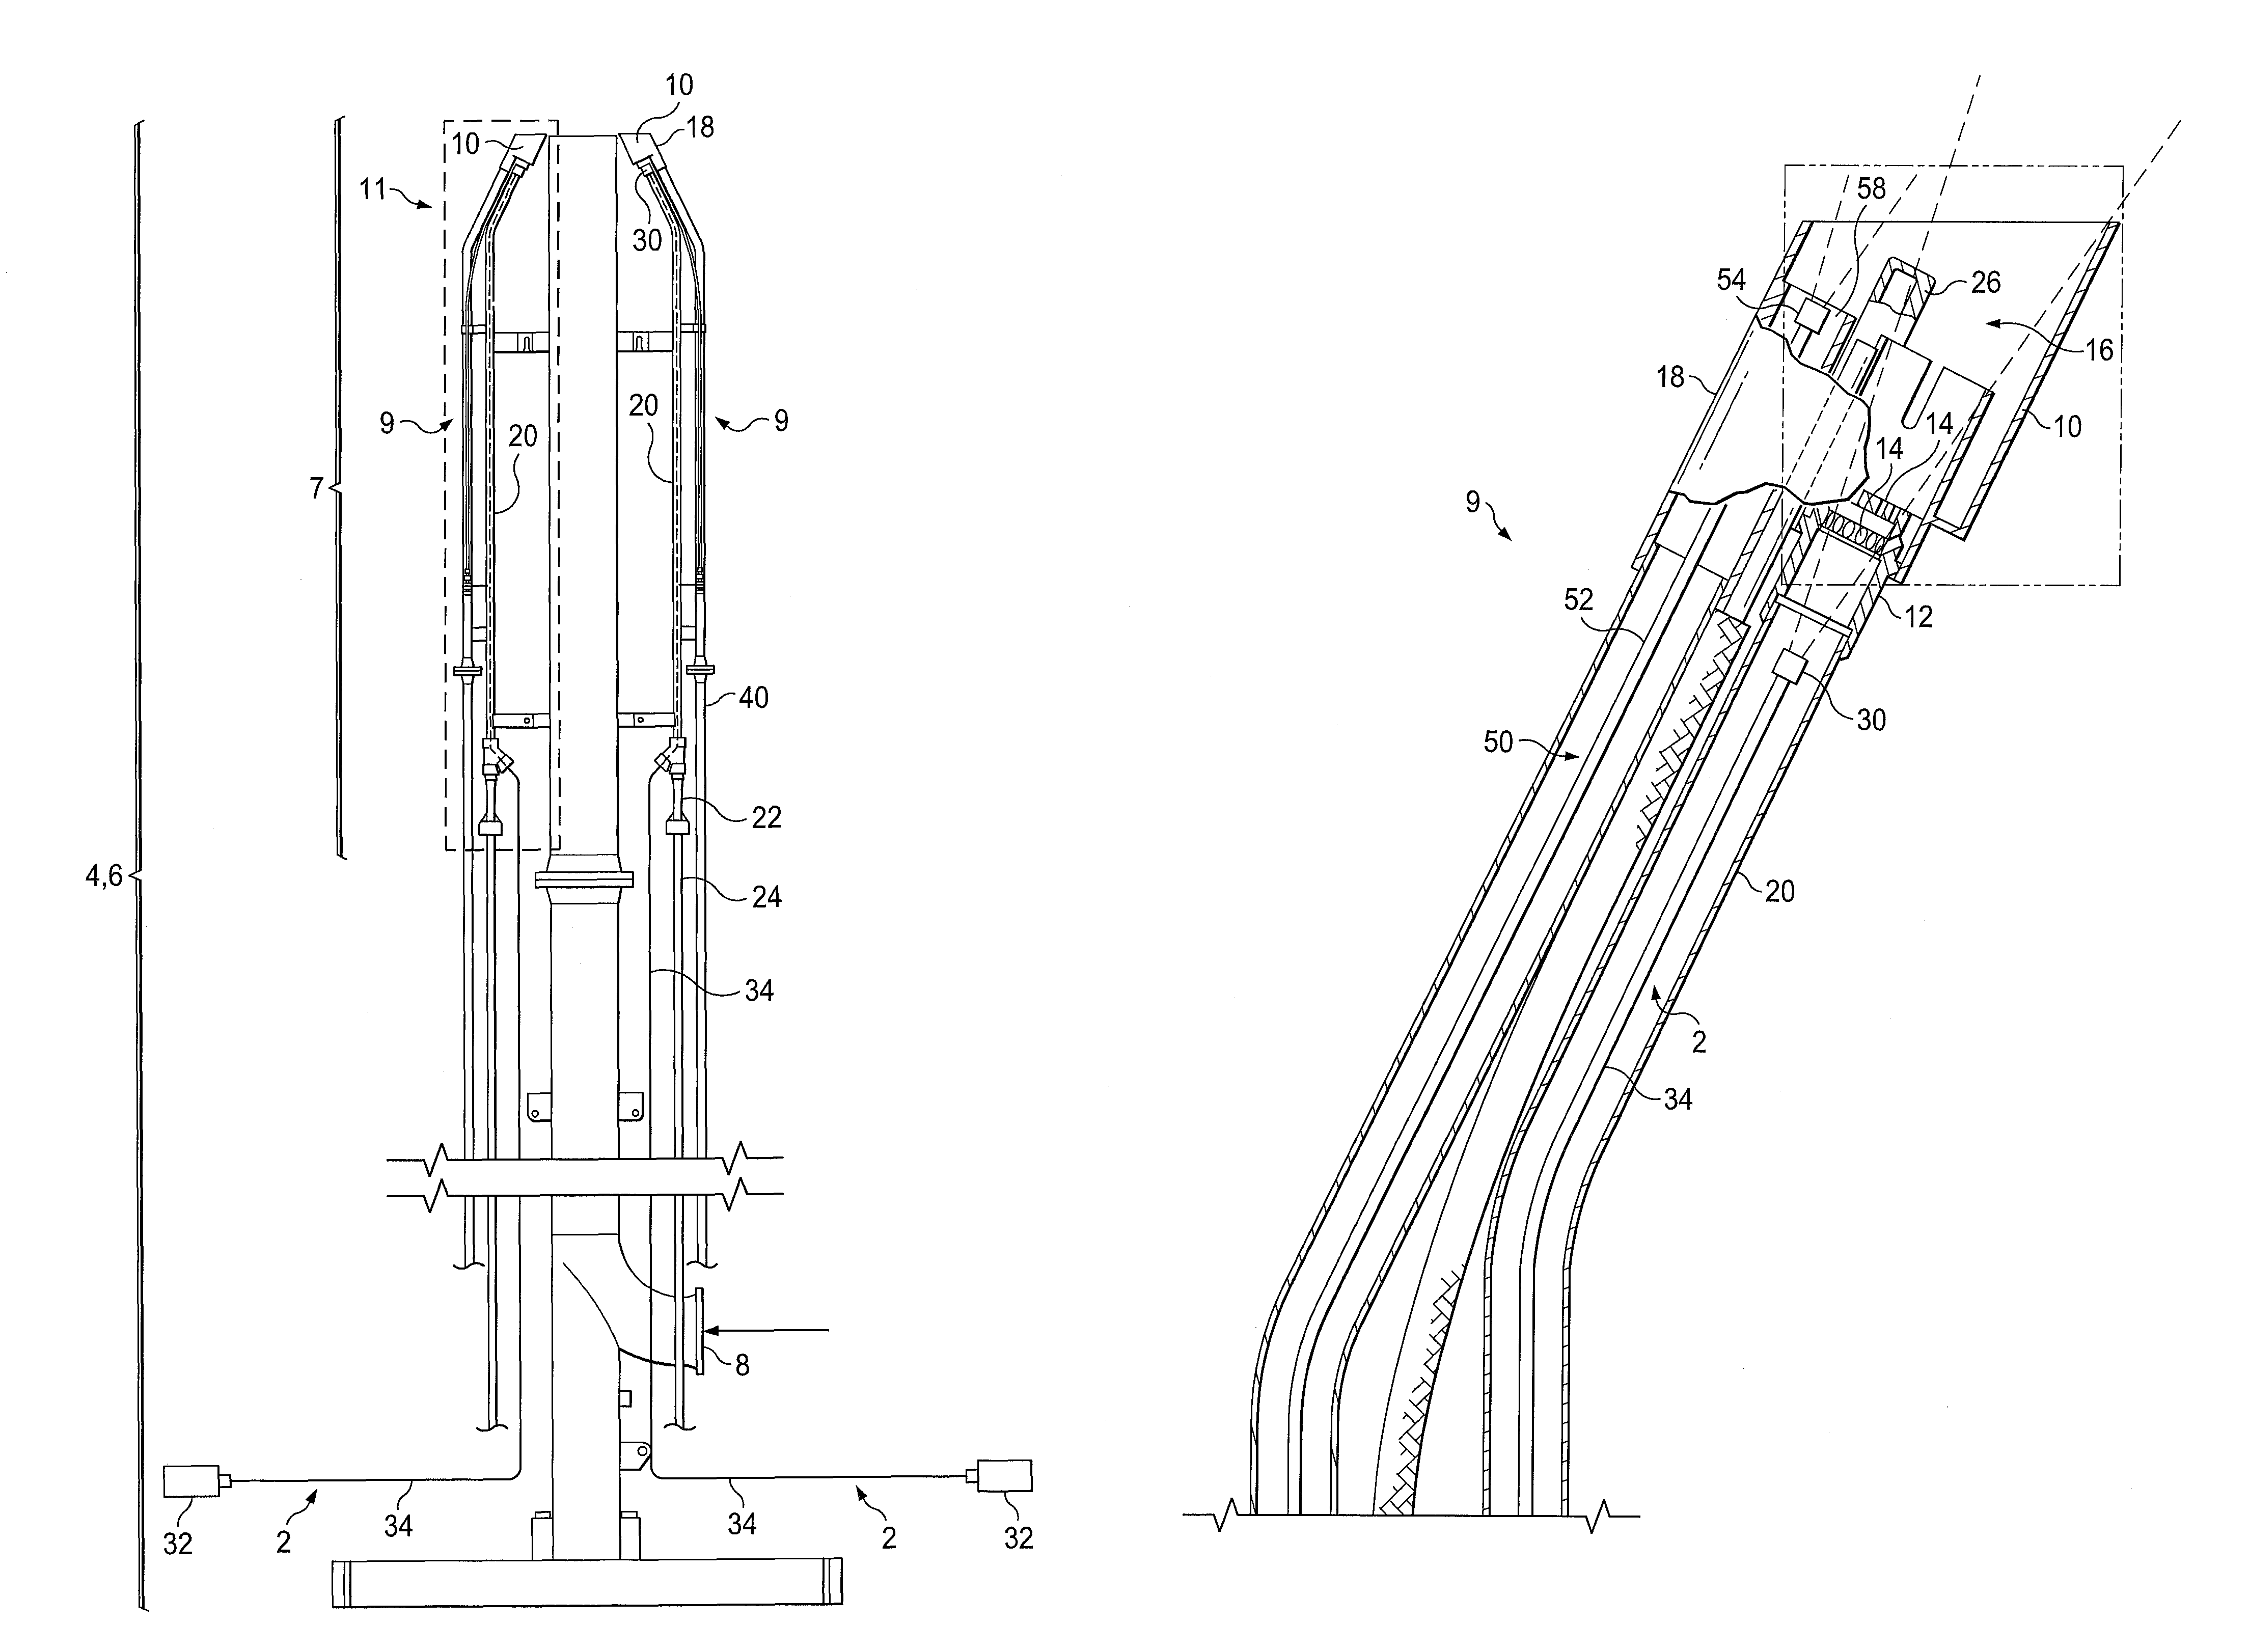 Apparatus and method for monitoring flares and flare pilots